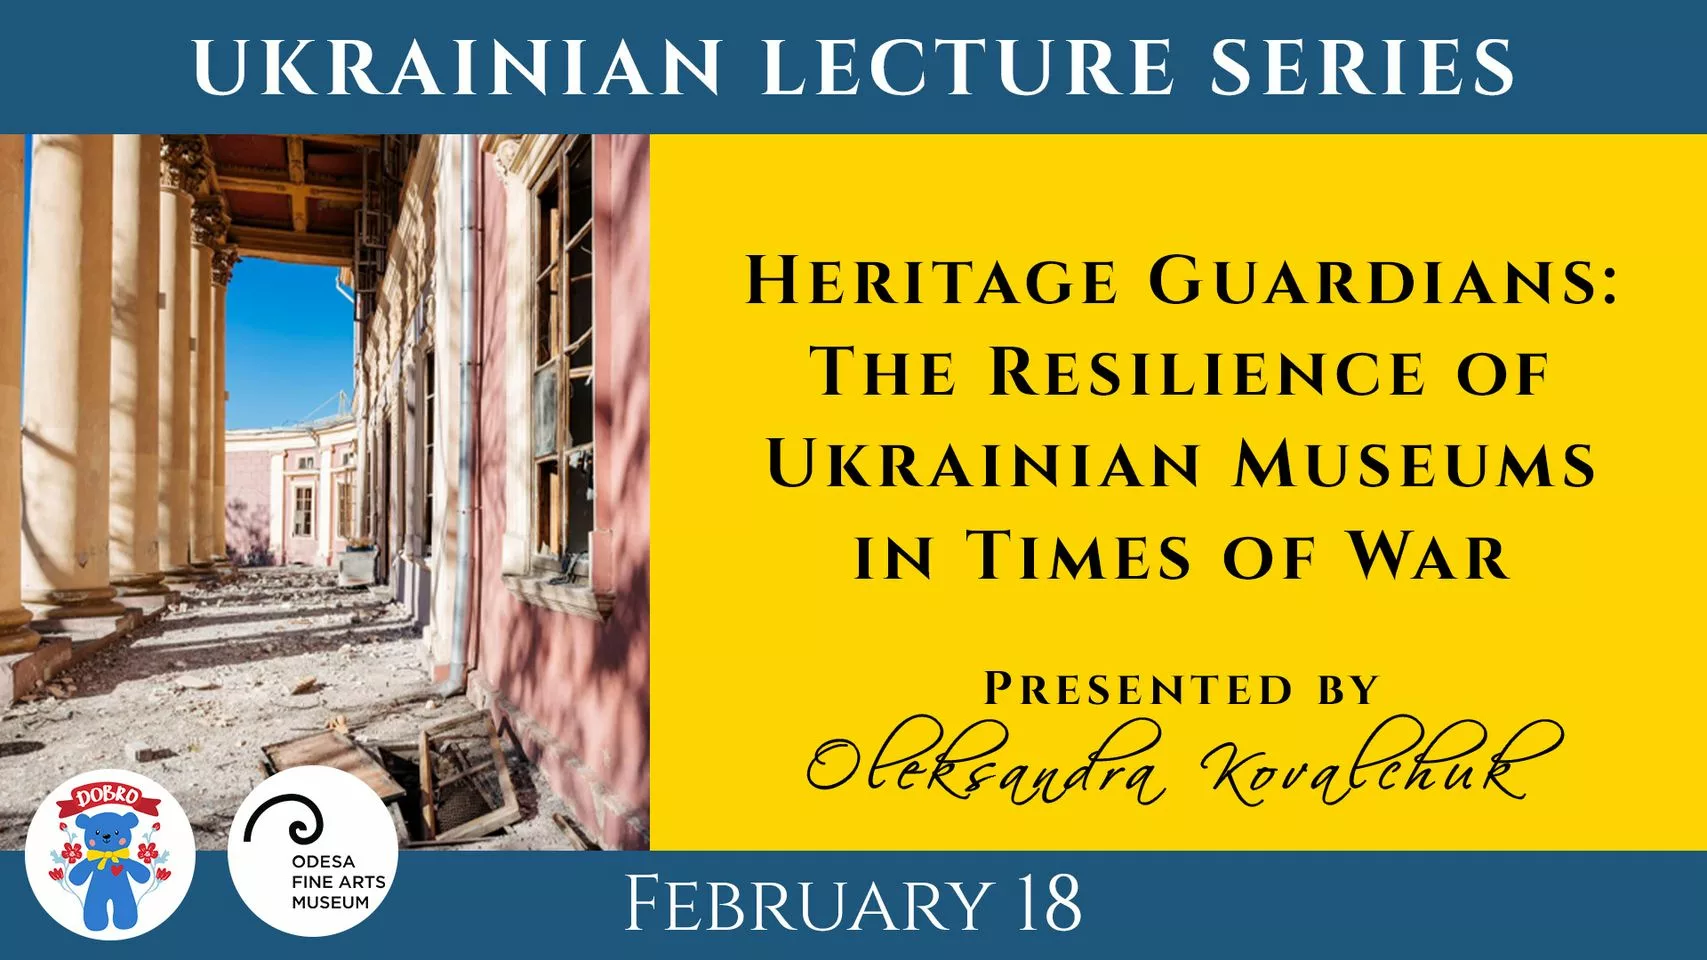 HERITAGE GUARDIANS: the resilience of Ukrainian museums in times of war